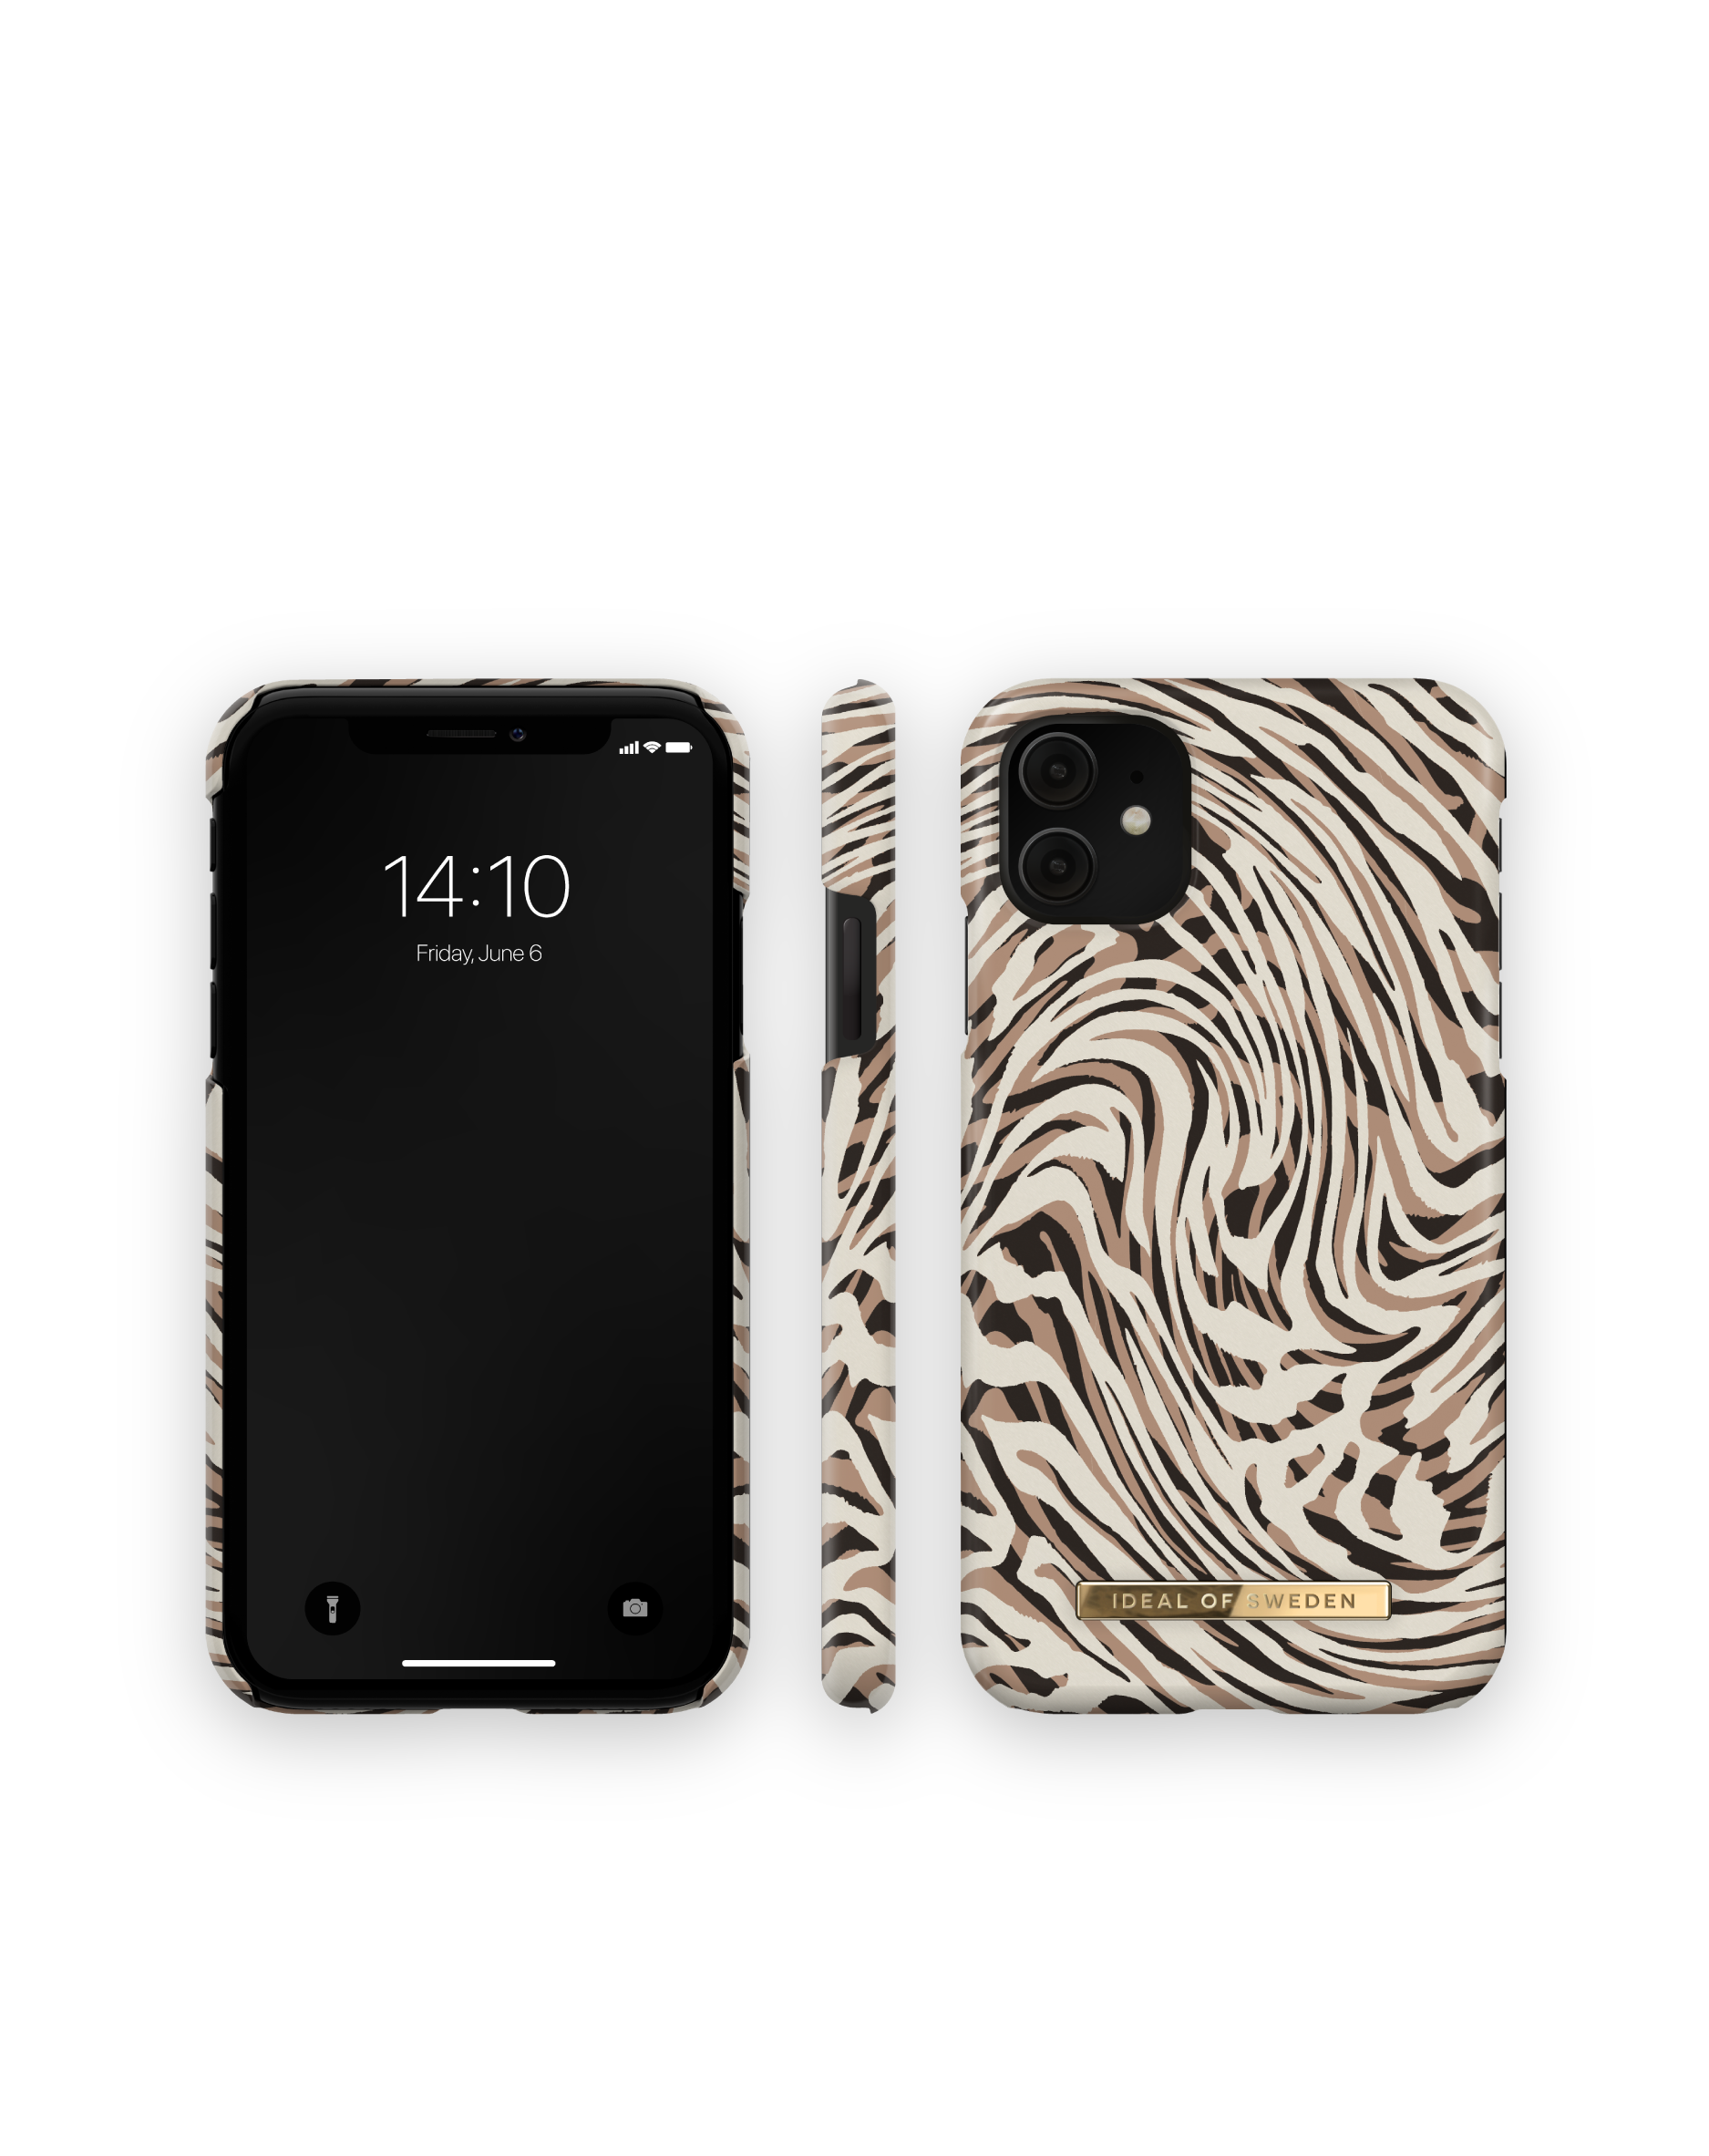 IDEAL OF SWEDEN IDFCSS22-I1961-392, XR, Zebra iPhone iPhone Apple, Backcover, / 11 Hypnotic